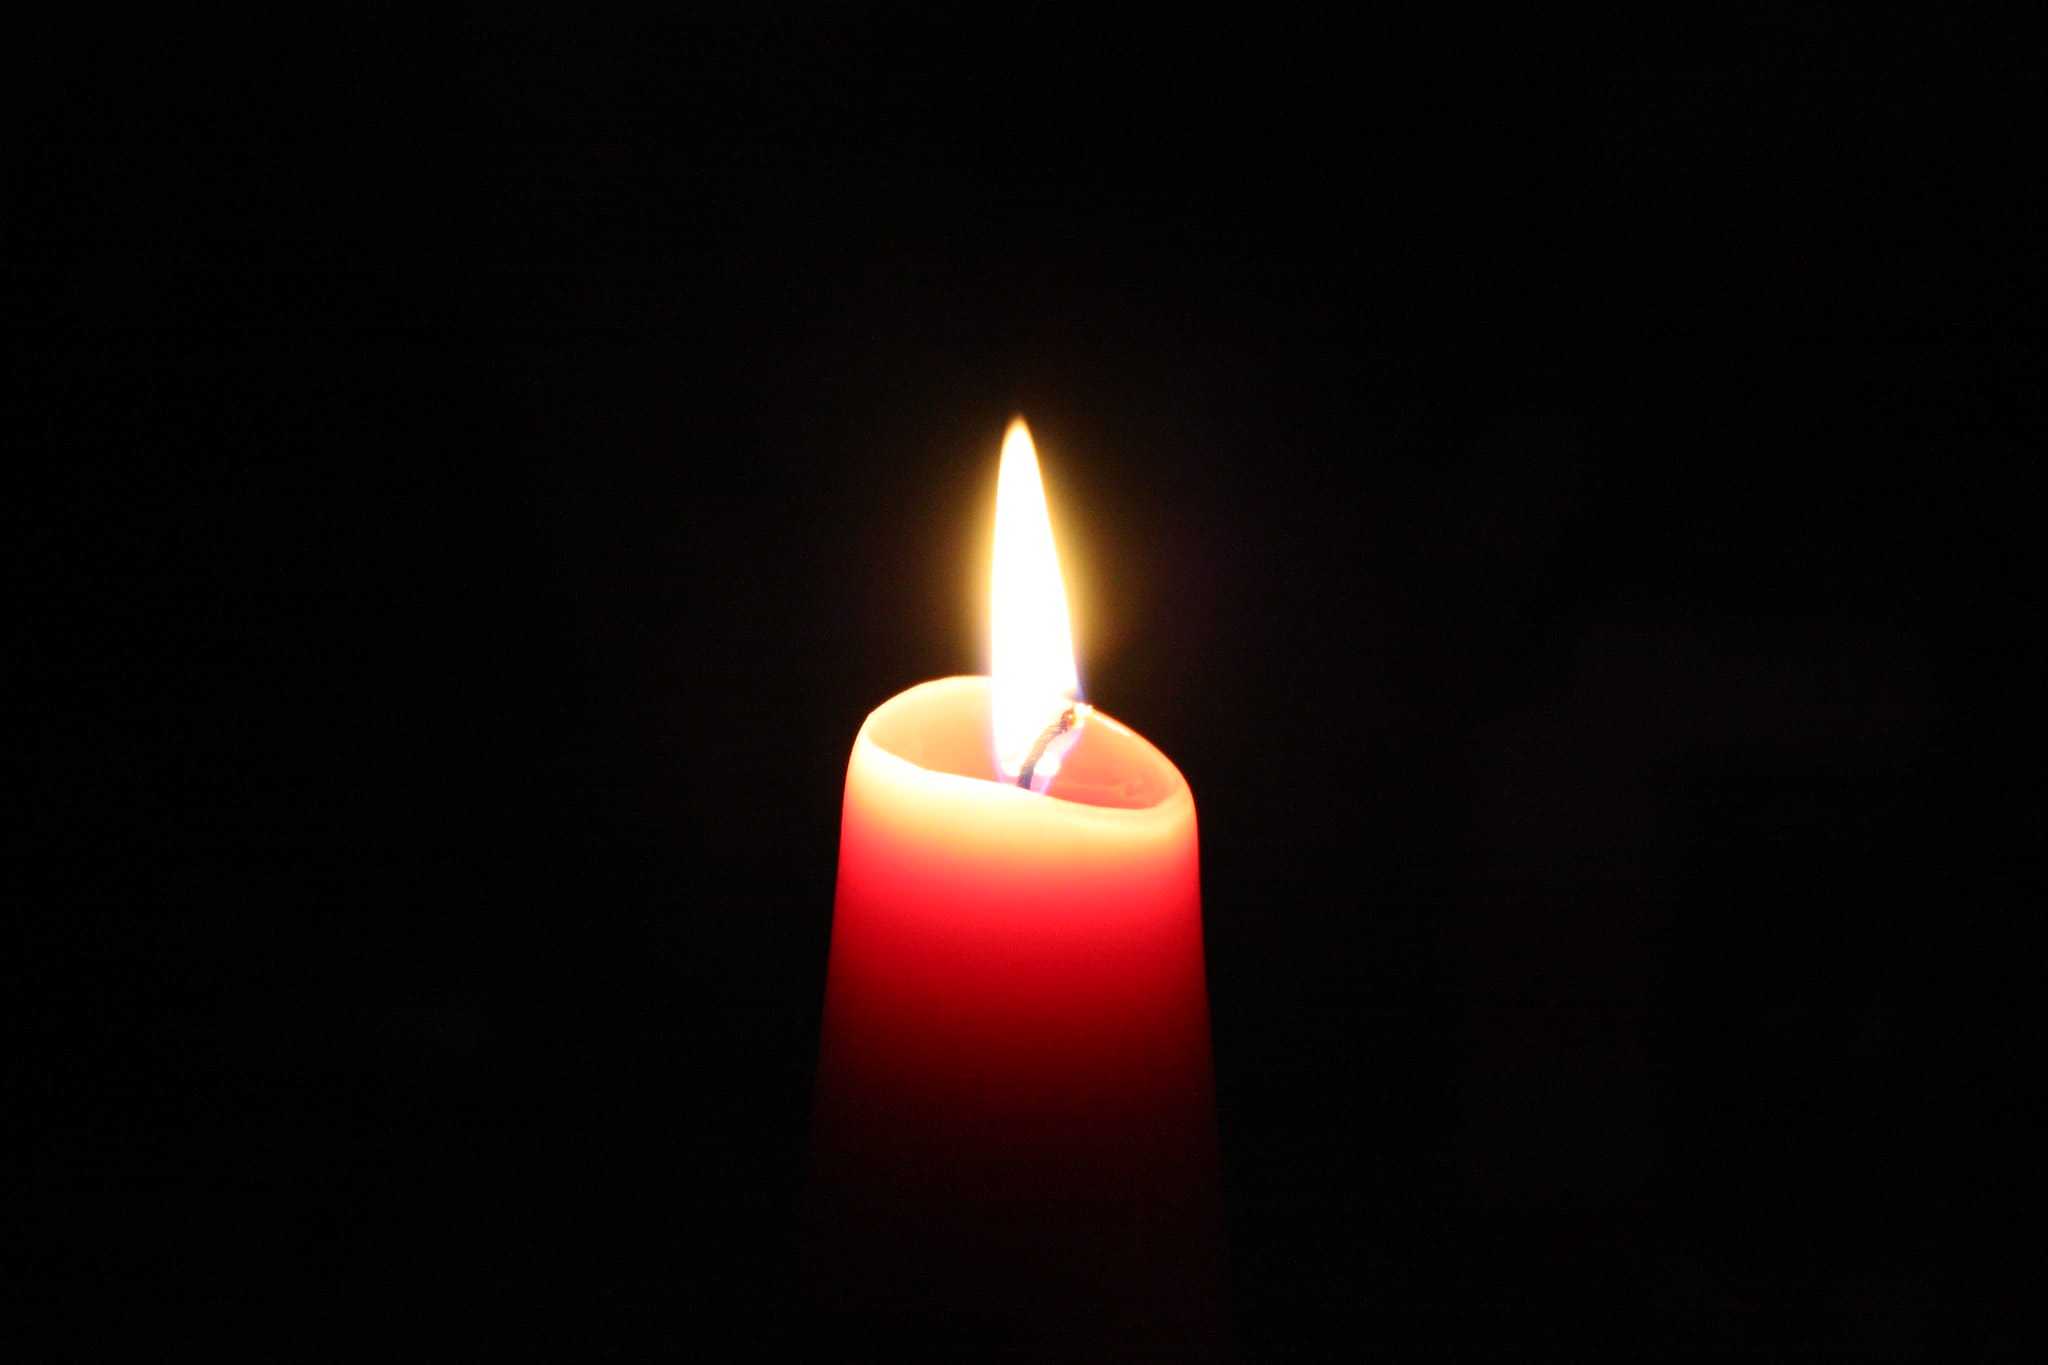 A single red candle burning brightly in a dark room.